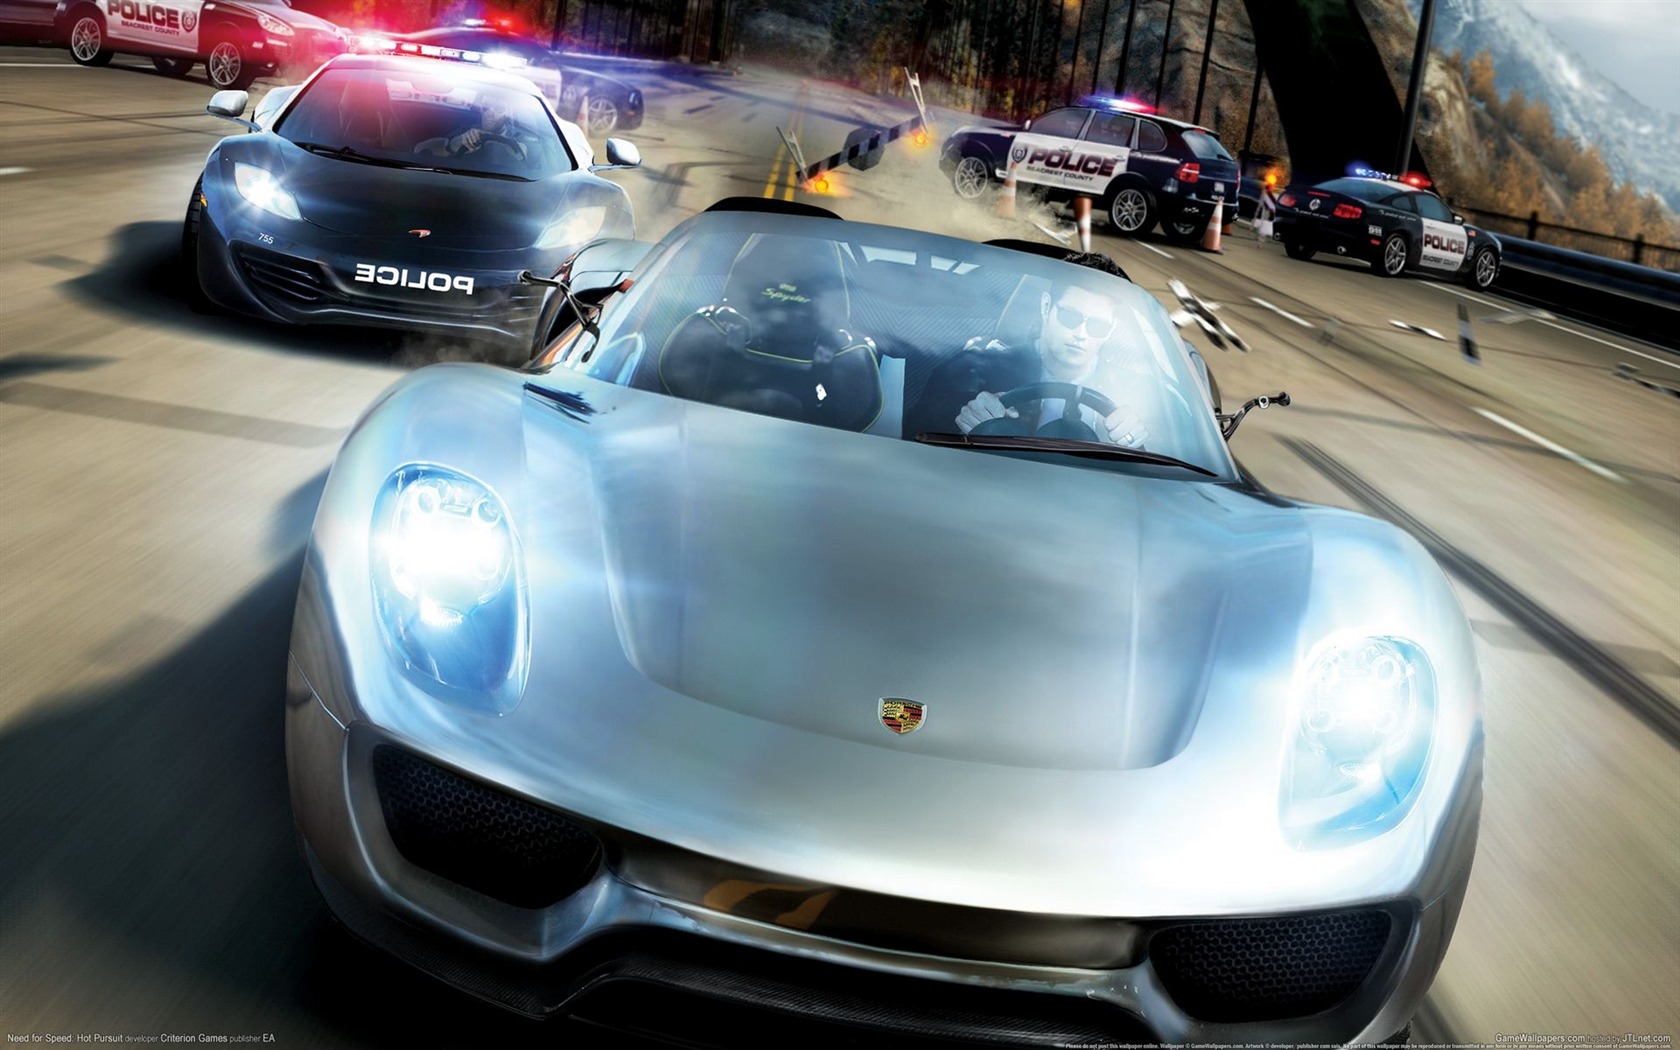 Need for Speed: Hot Pursuit 極品飛車14：熱力追踪 #4 - 1680x1050